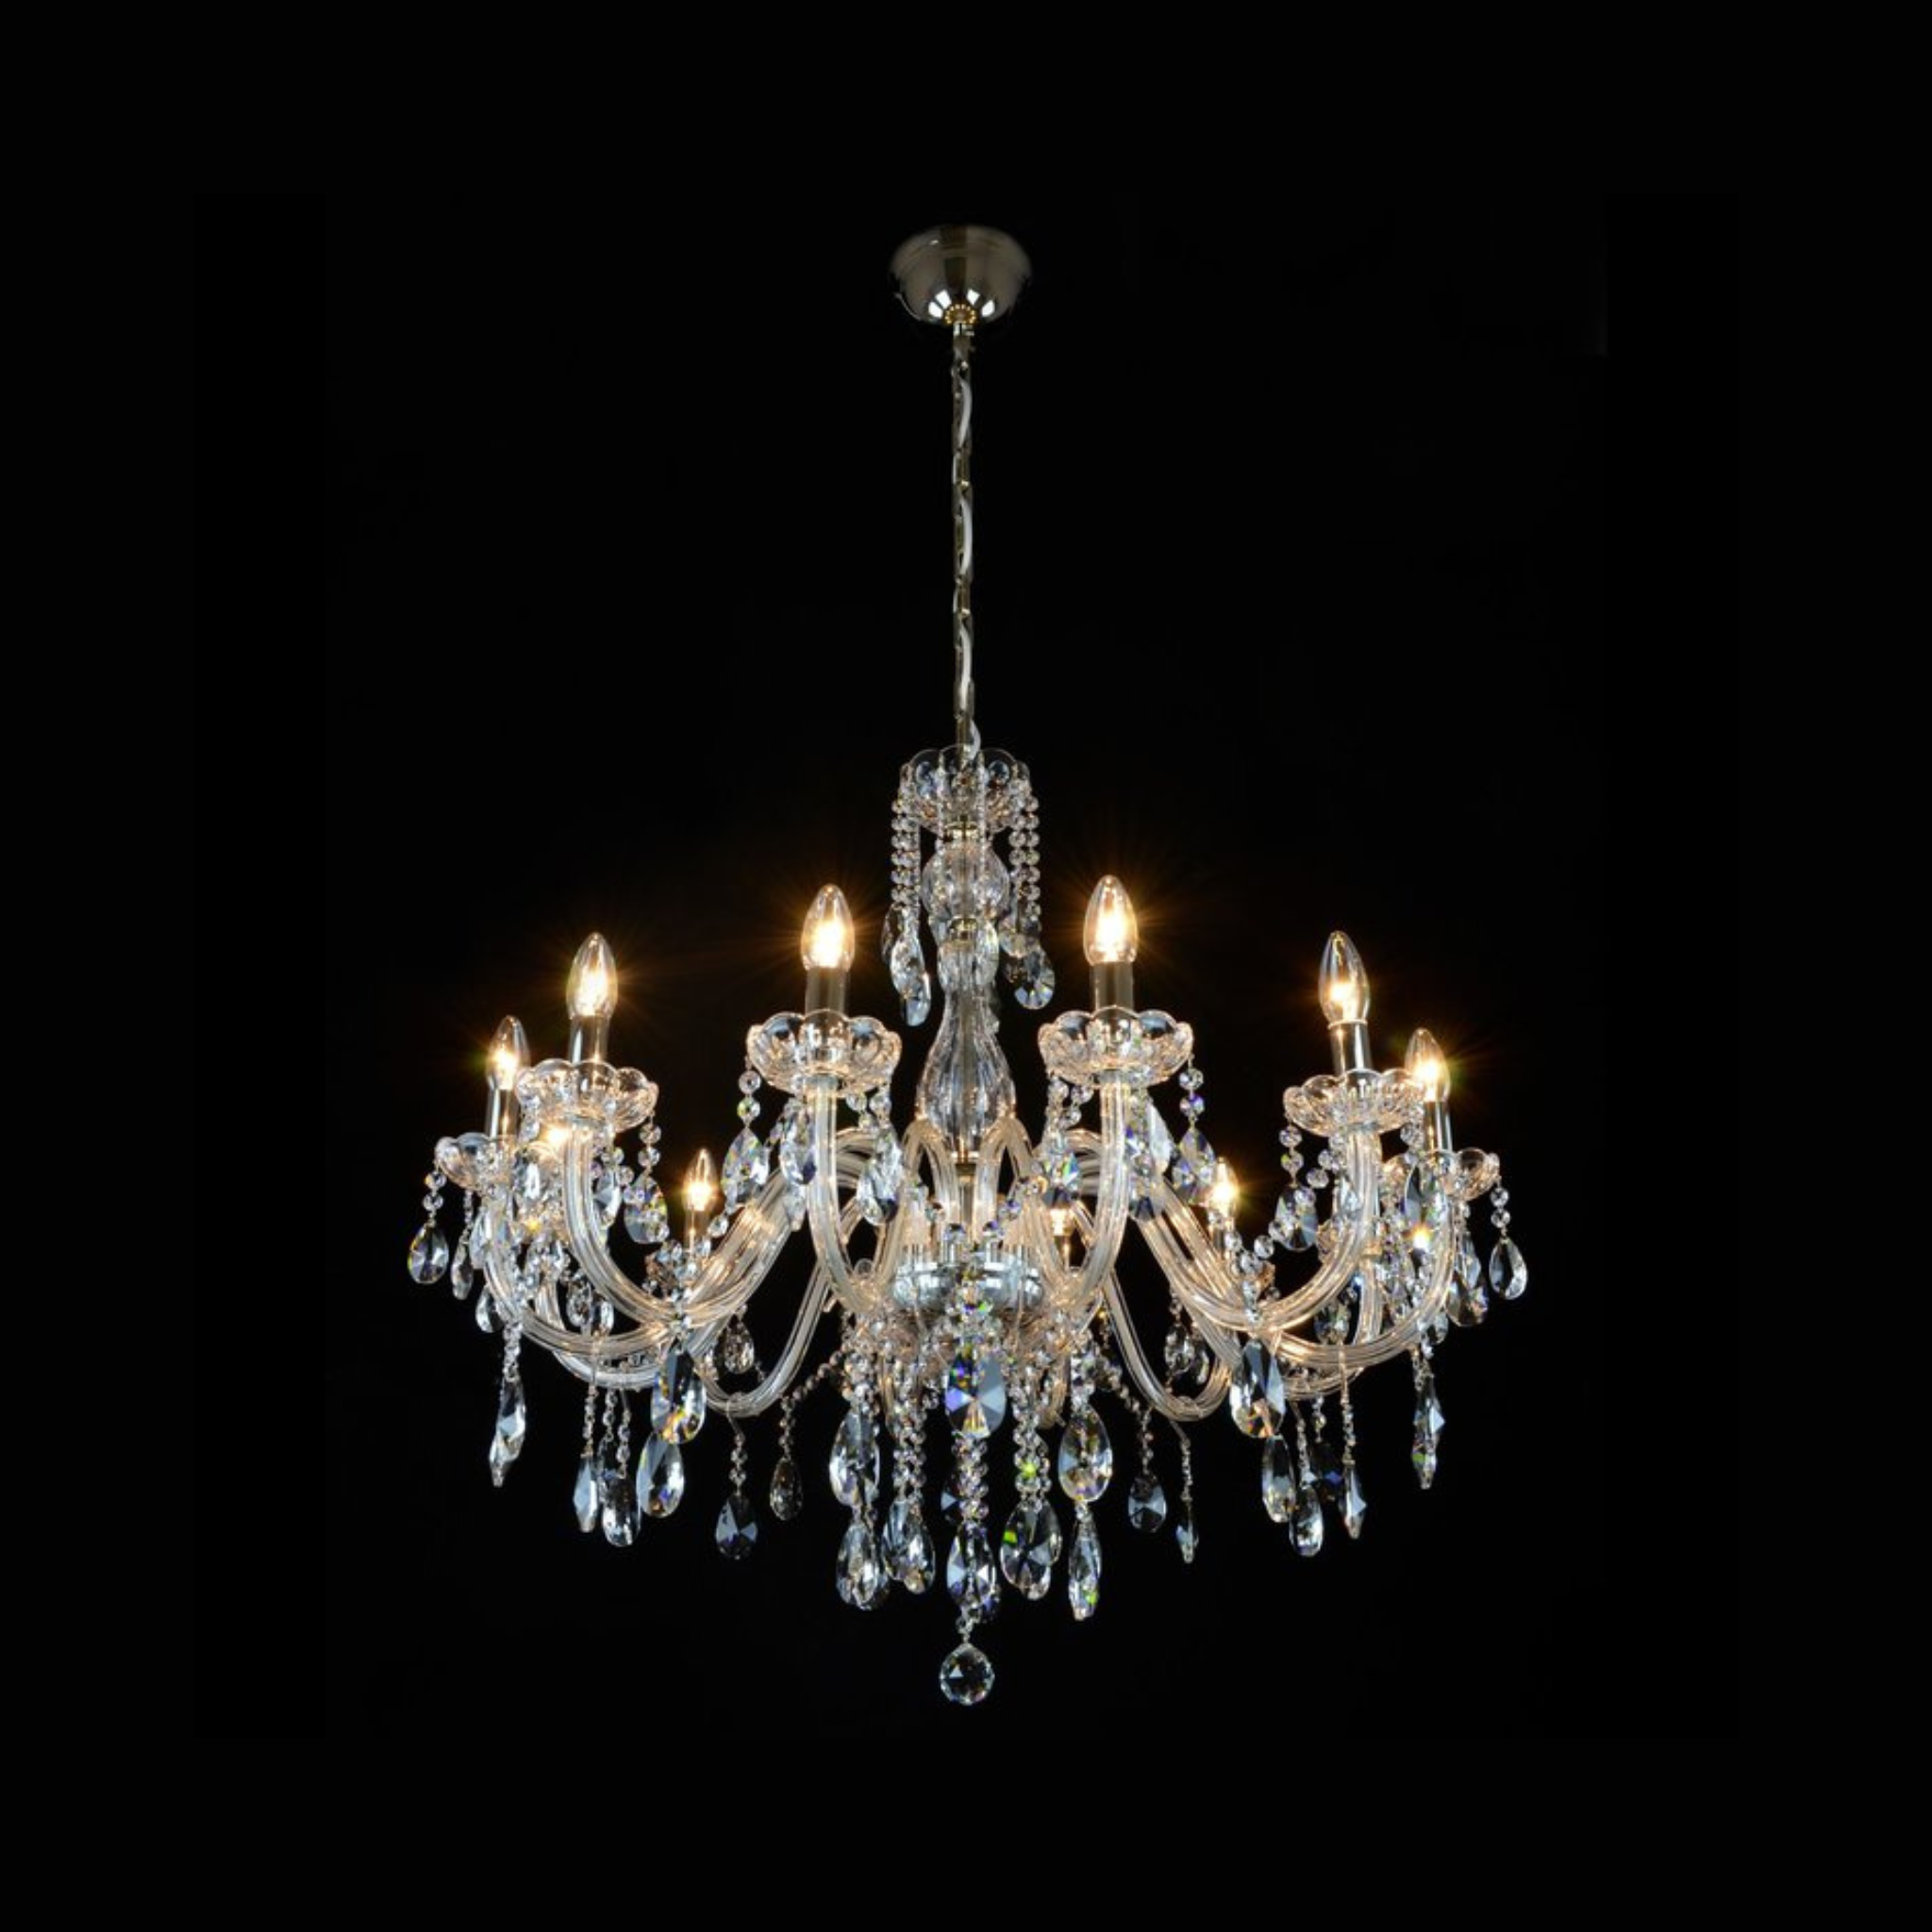 Clarit 12 Crystal Glass Chandelier - Wranovsky - Luxury Lighting Boutique